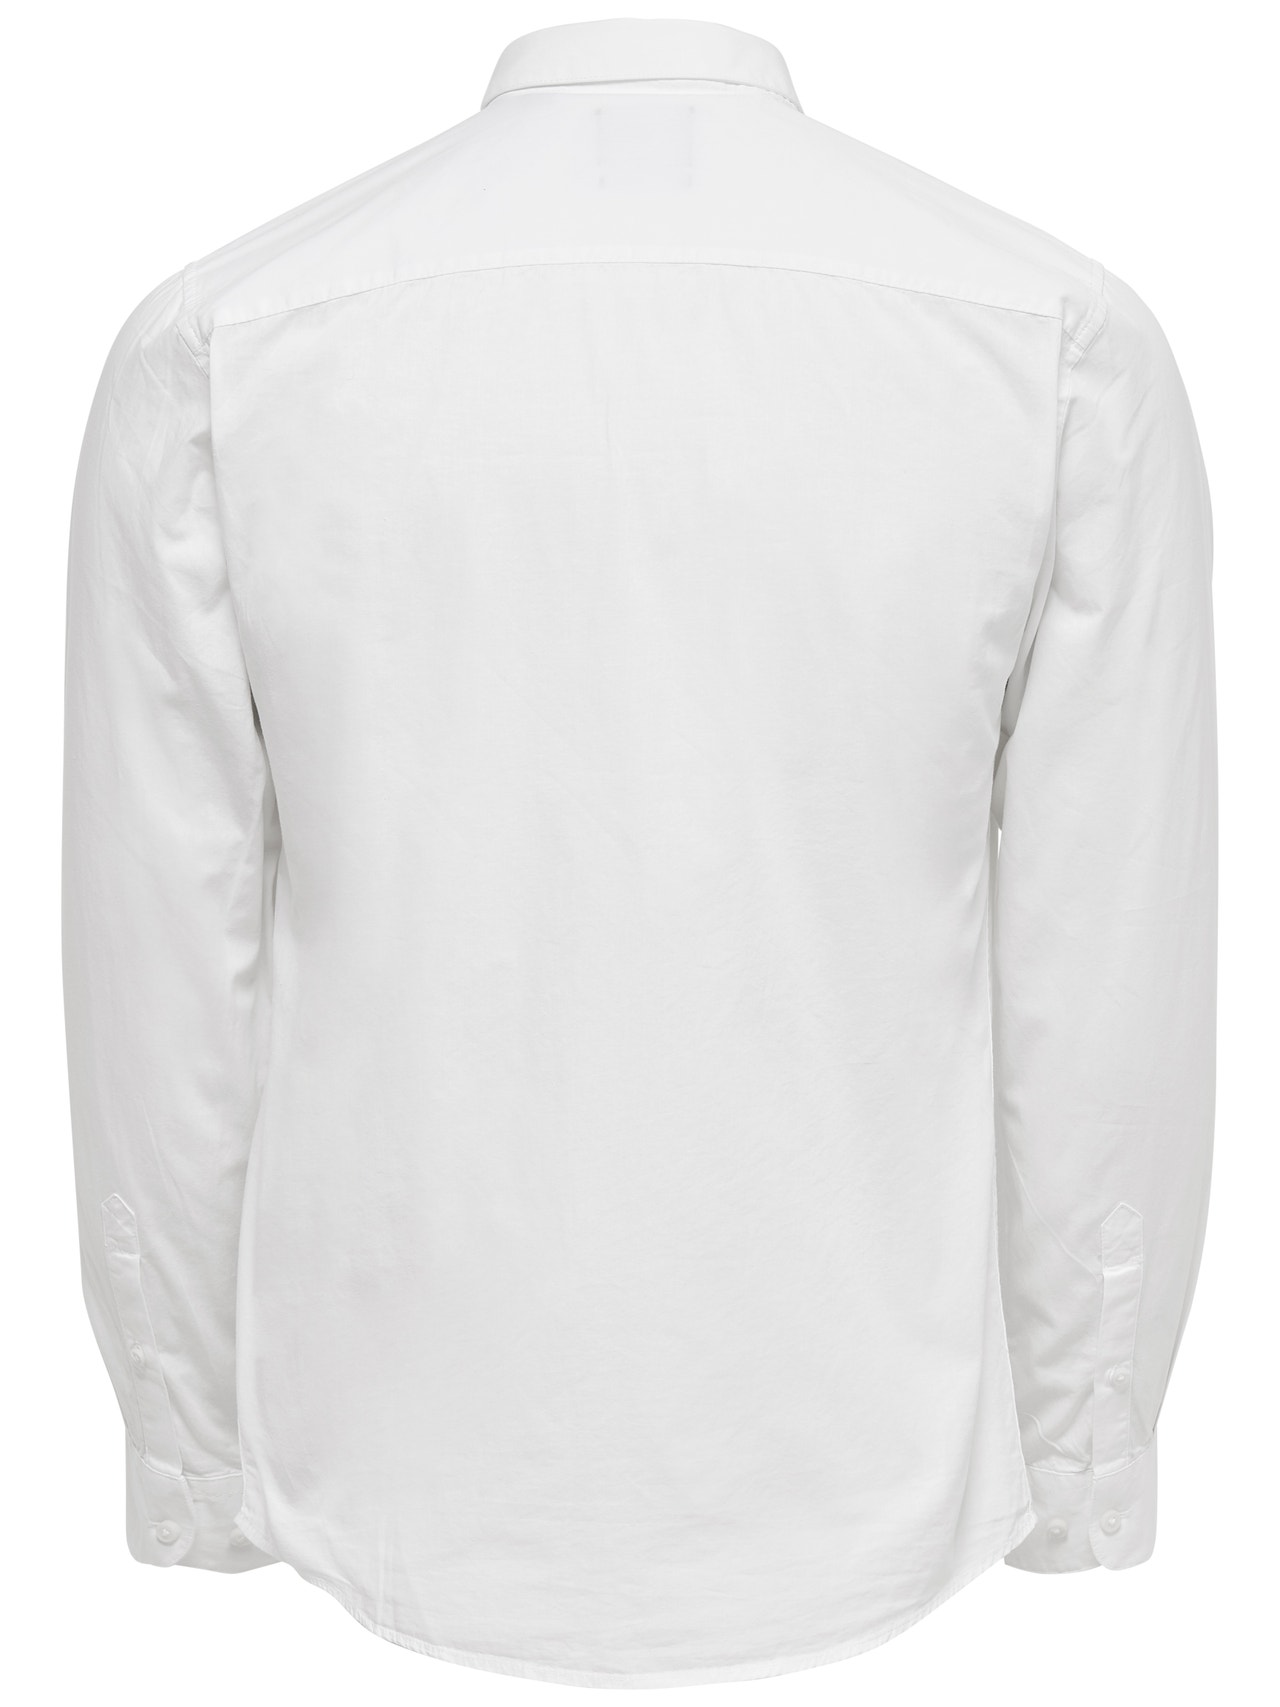 ONLY & SONS Slim Fit Shirt collar Shirt -White - 22010862